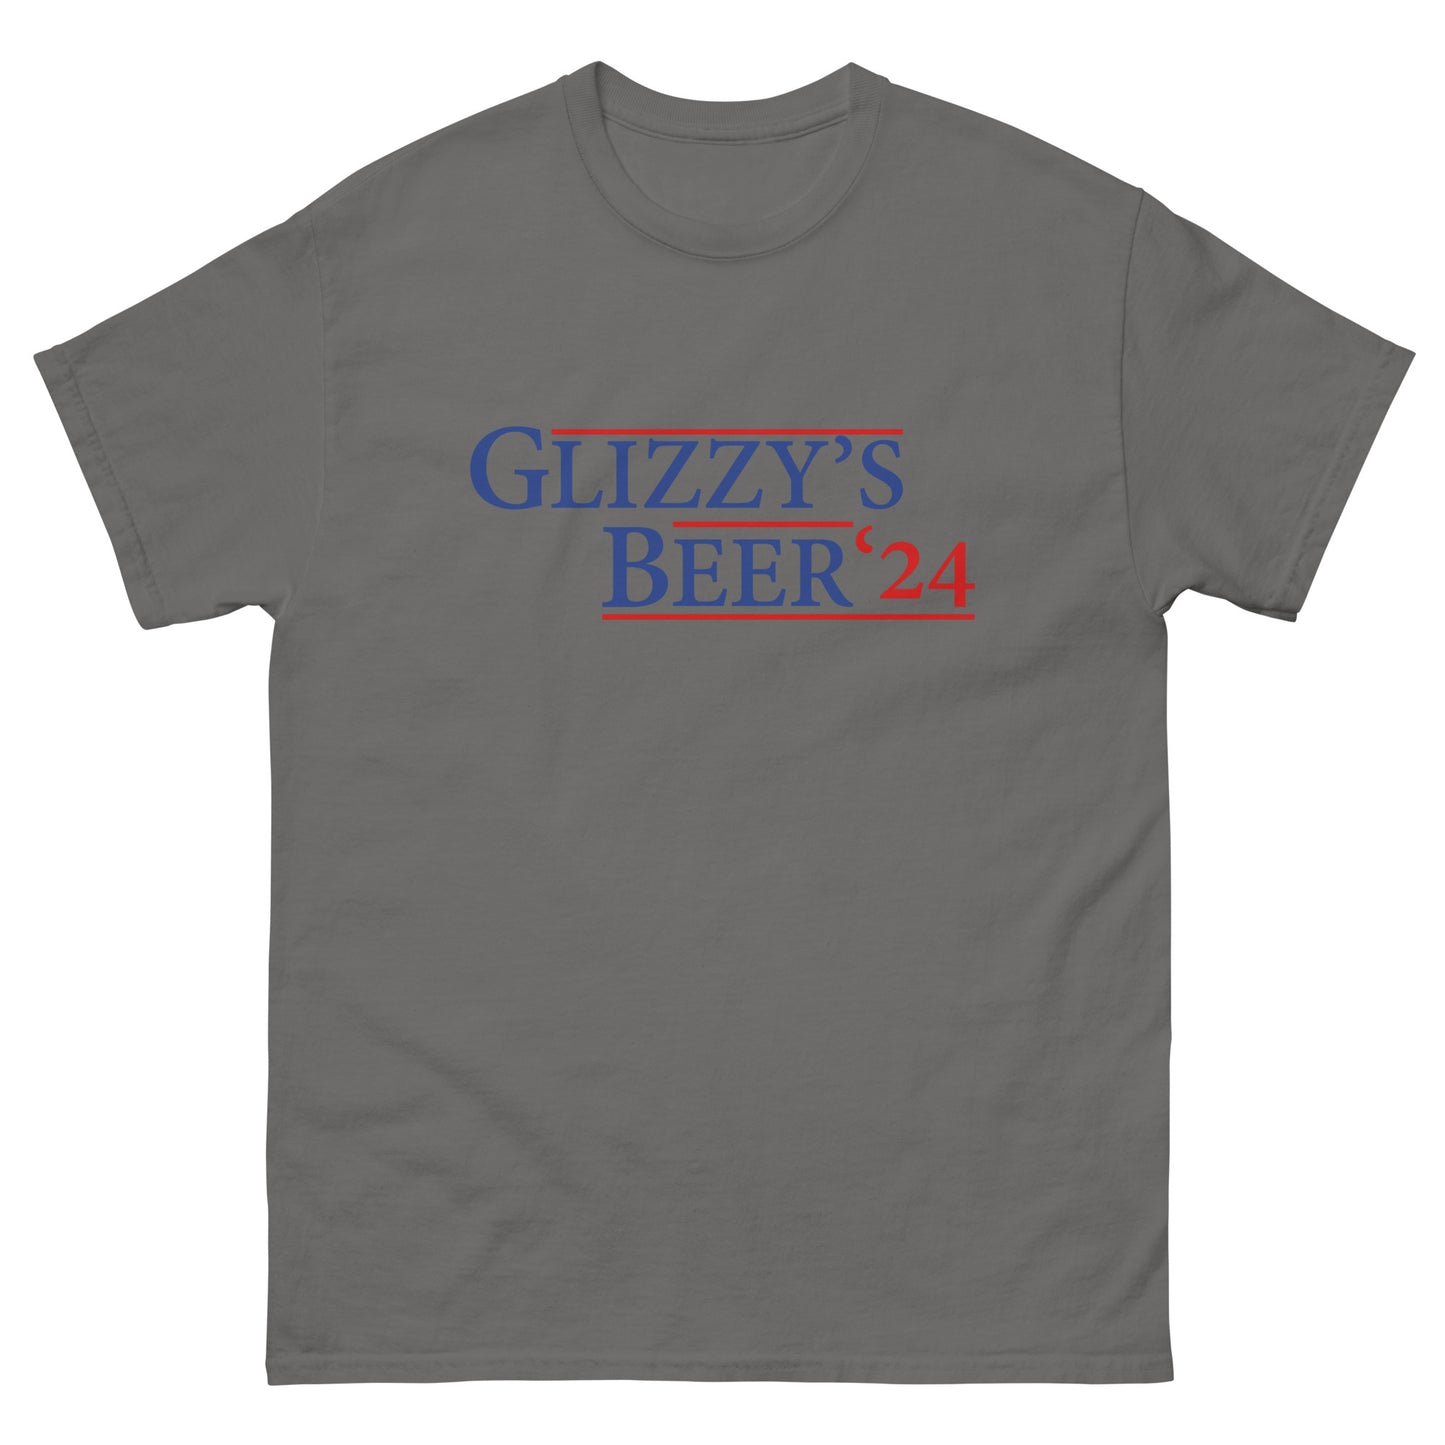 Glizzy's | Beer Classic Tee